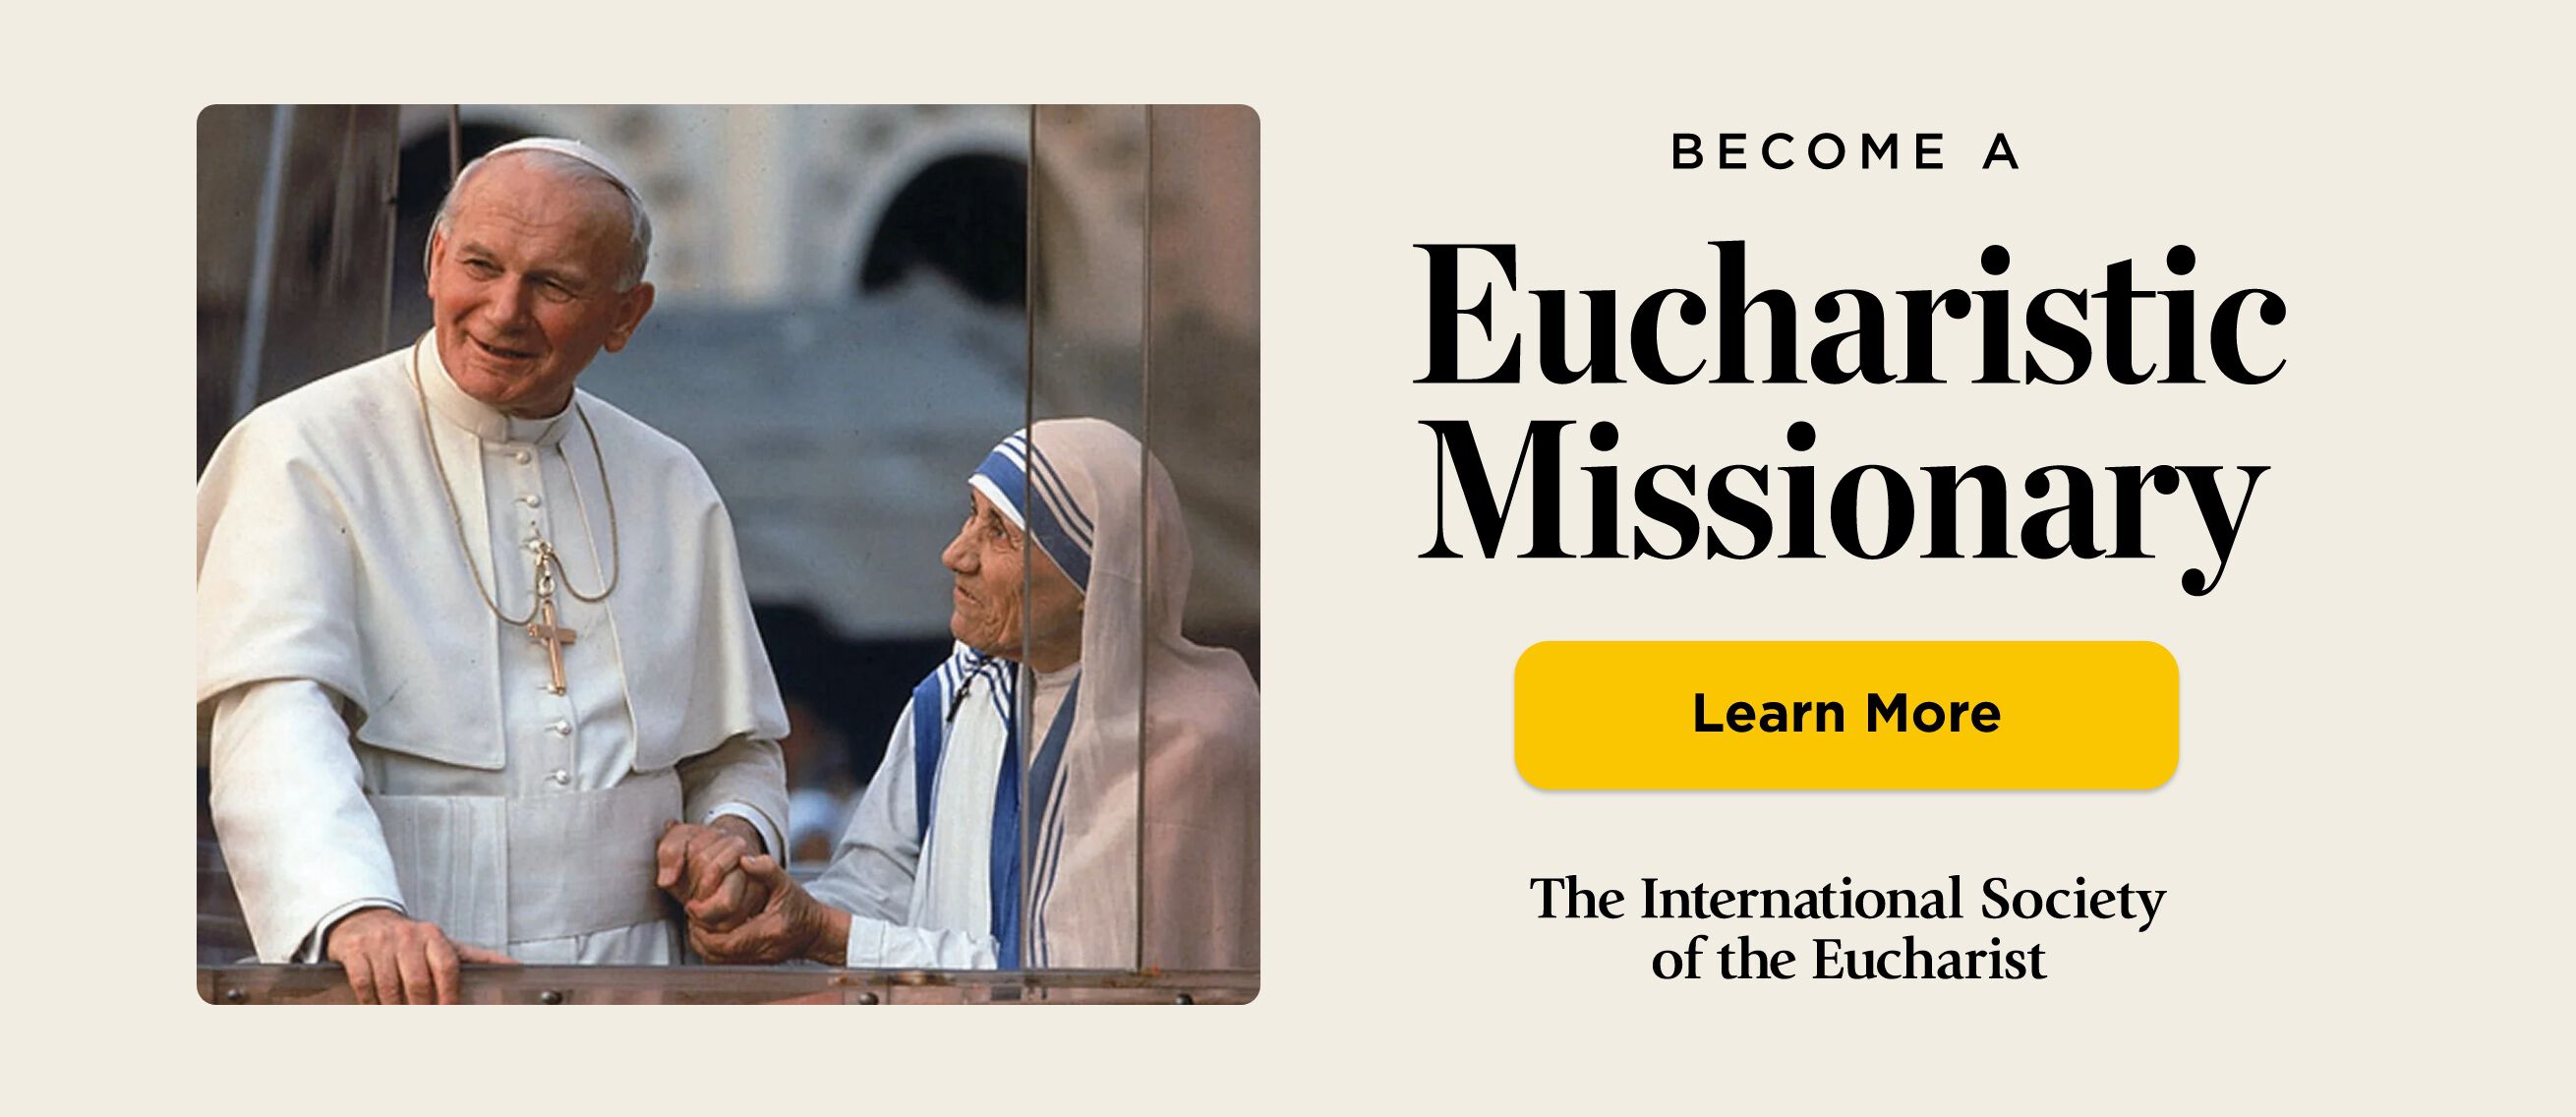 Become a Eucharistic Missionary